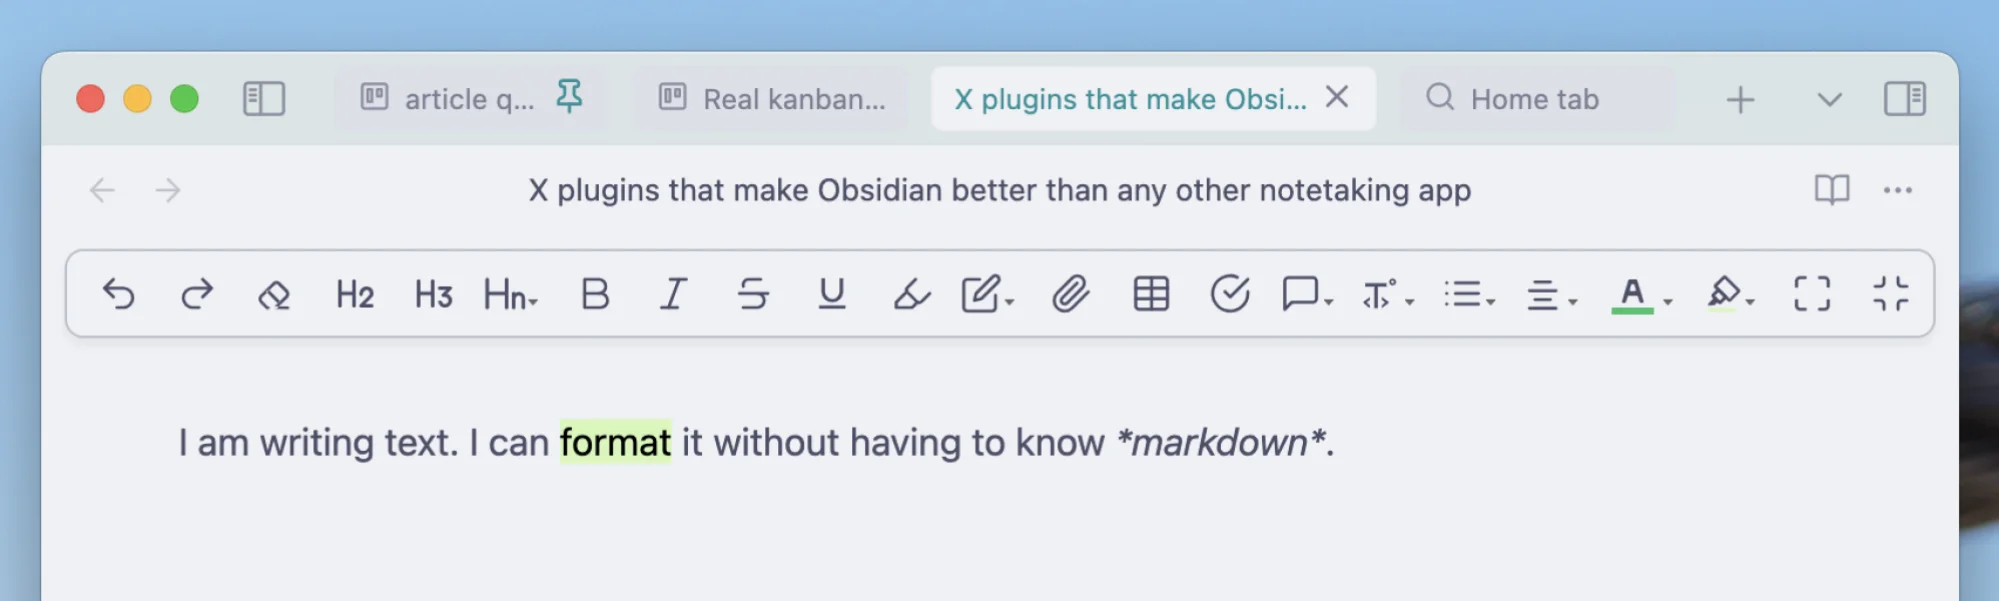 There's a toolbar at the top of the window with standard formatting tools: undo, redo, headlines, bold, italic, strikethrough, underline, highlight, and more.